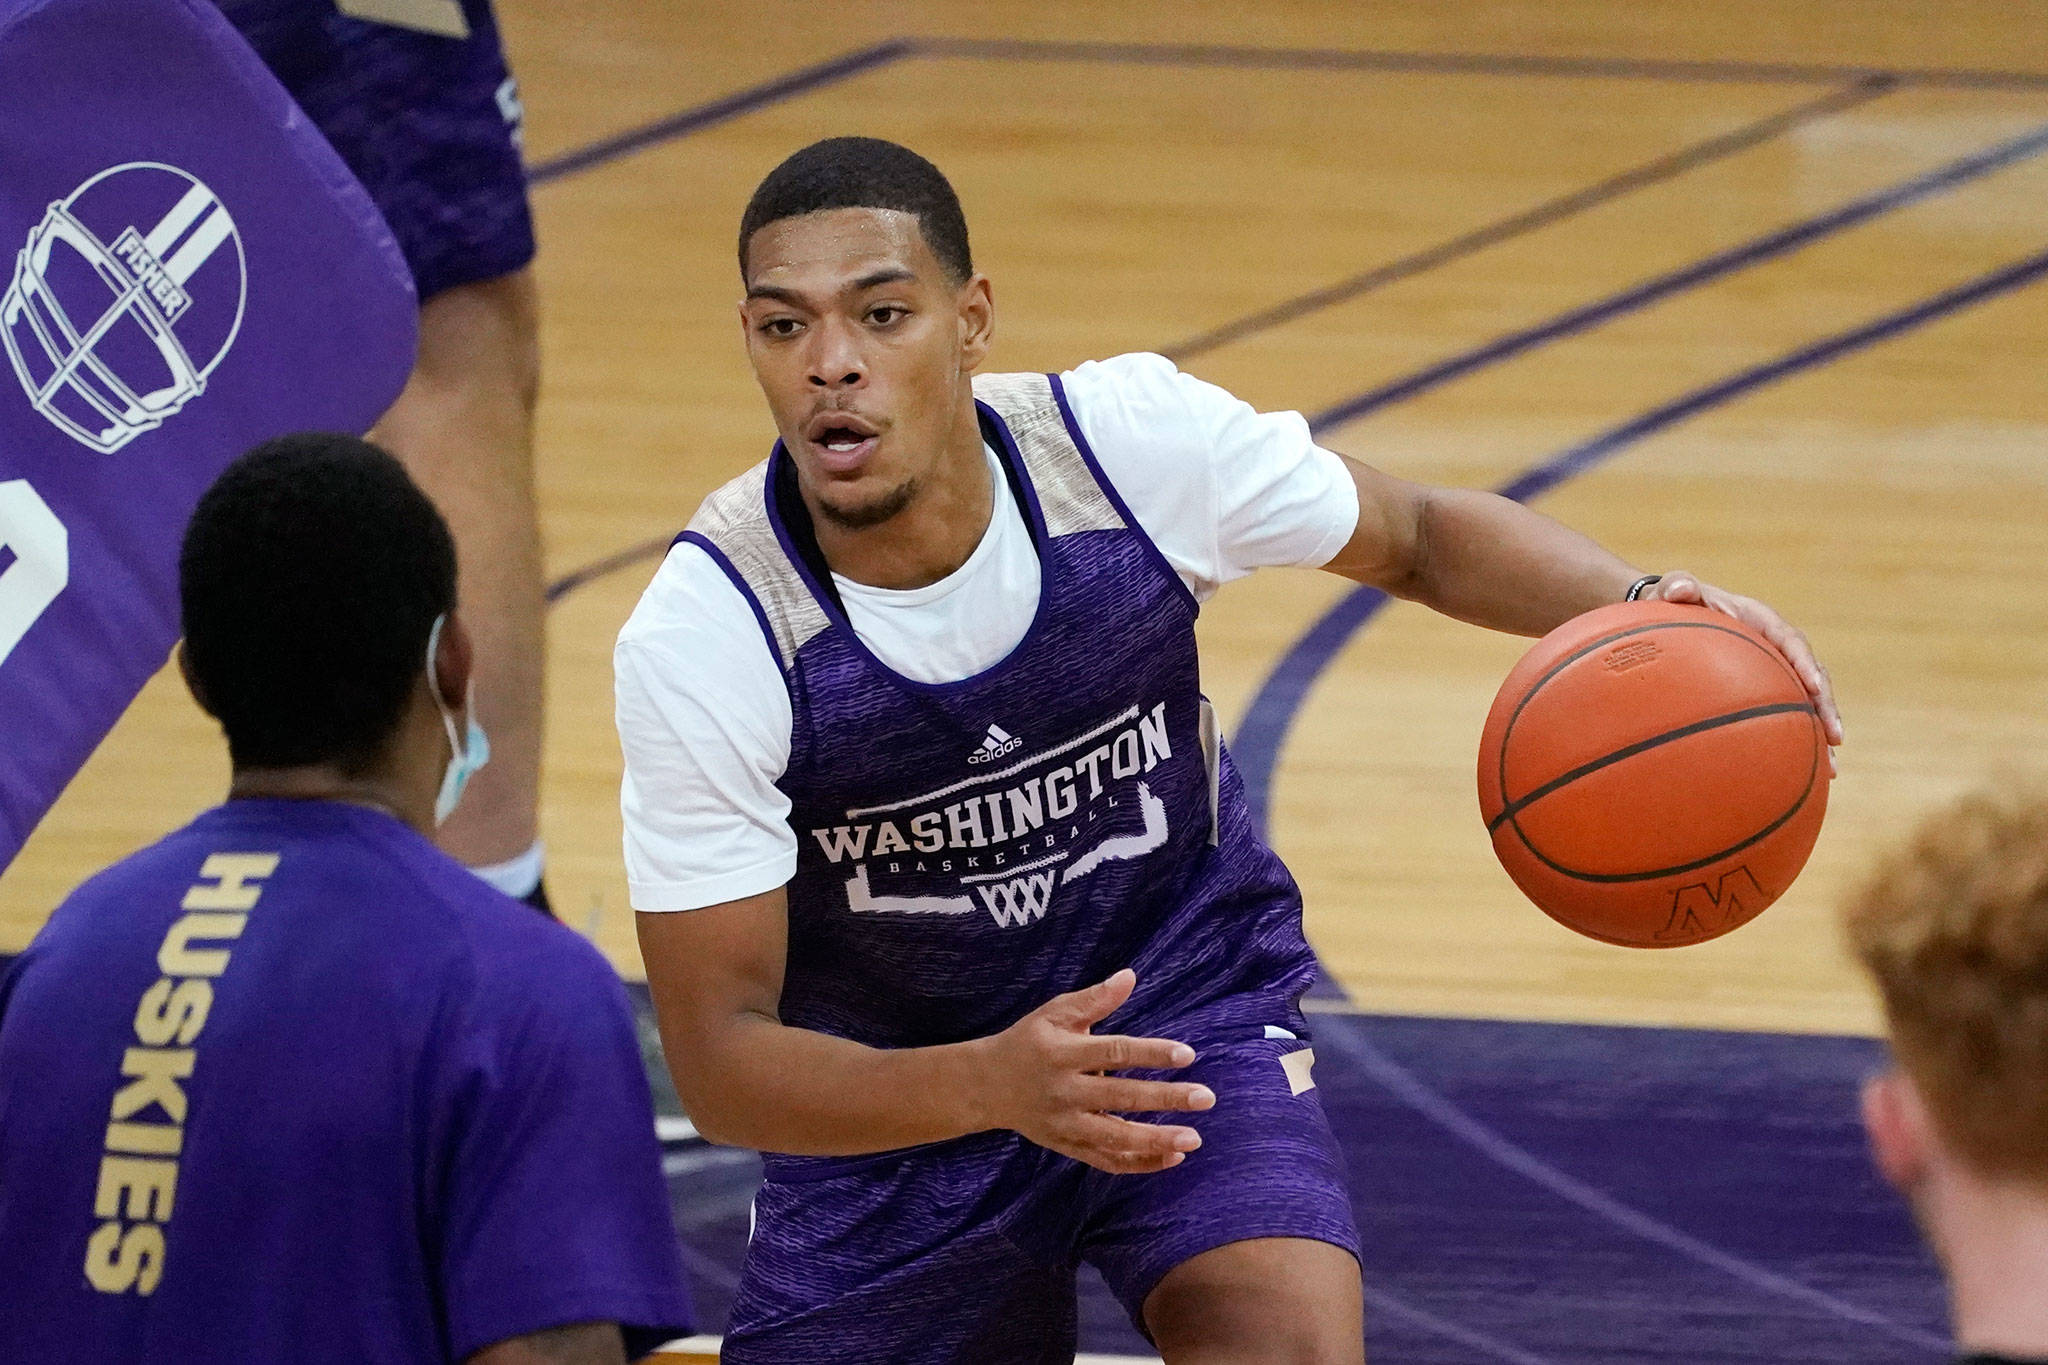 Washington guard Quade Green dribbles during practice on Oct. 27, 2020, in Seattle. (AP Photo/Elaine Thompson)